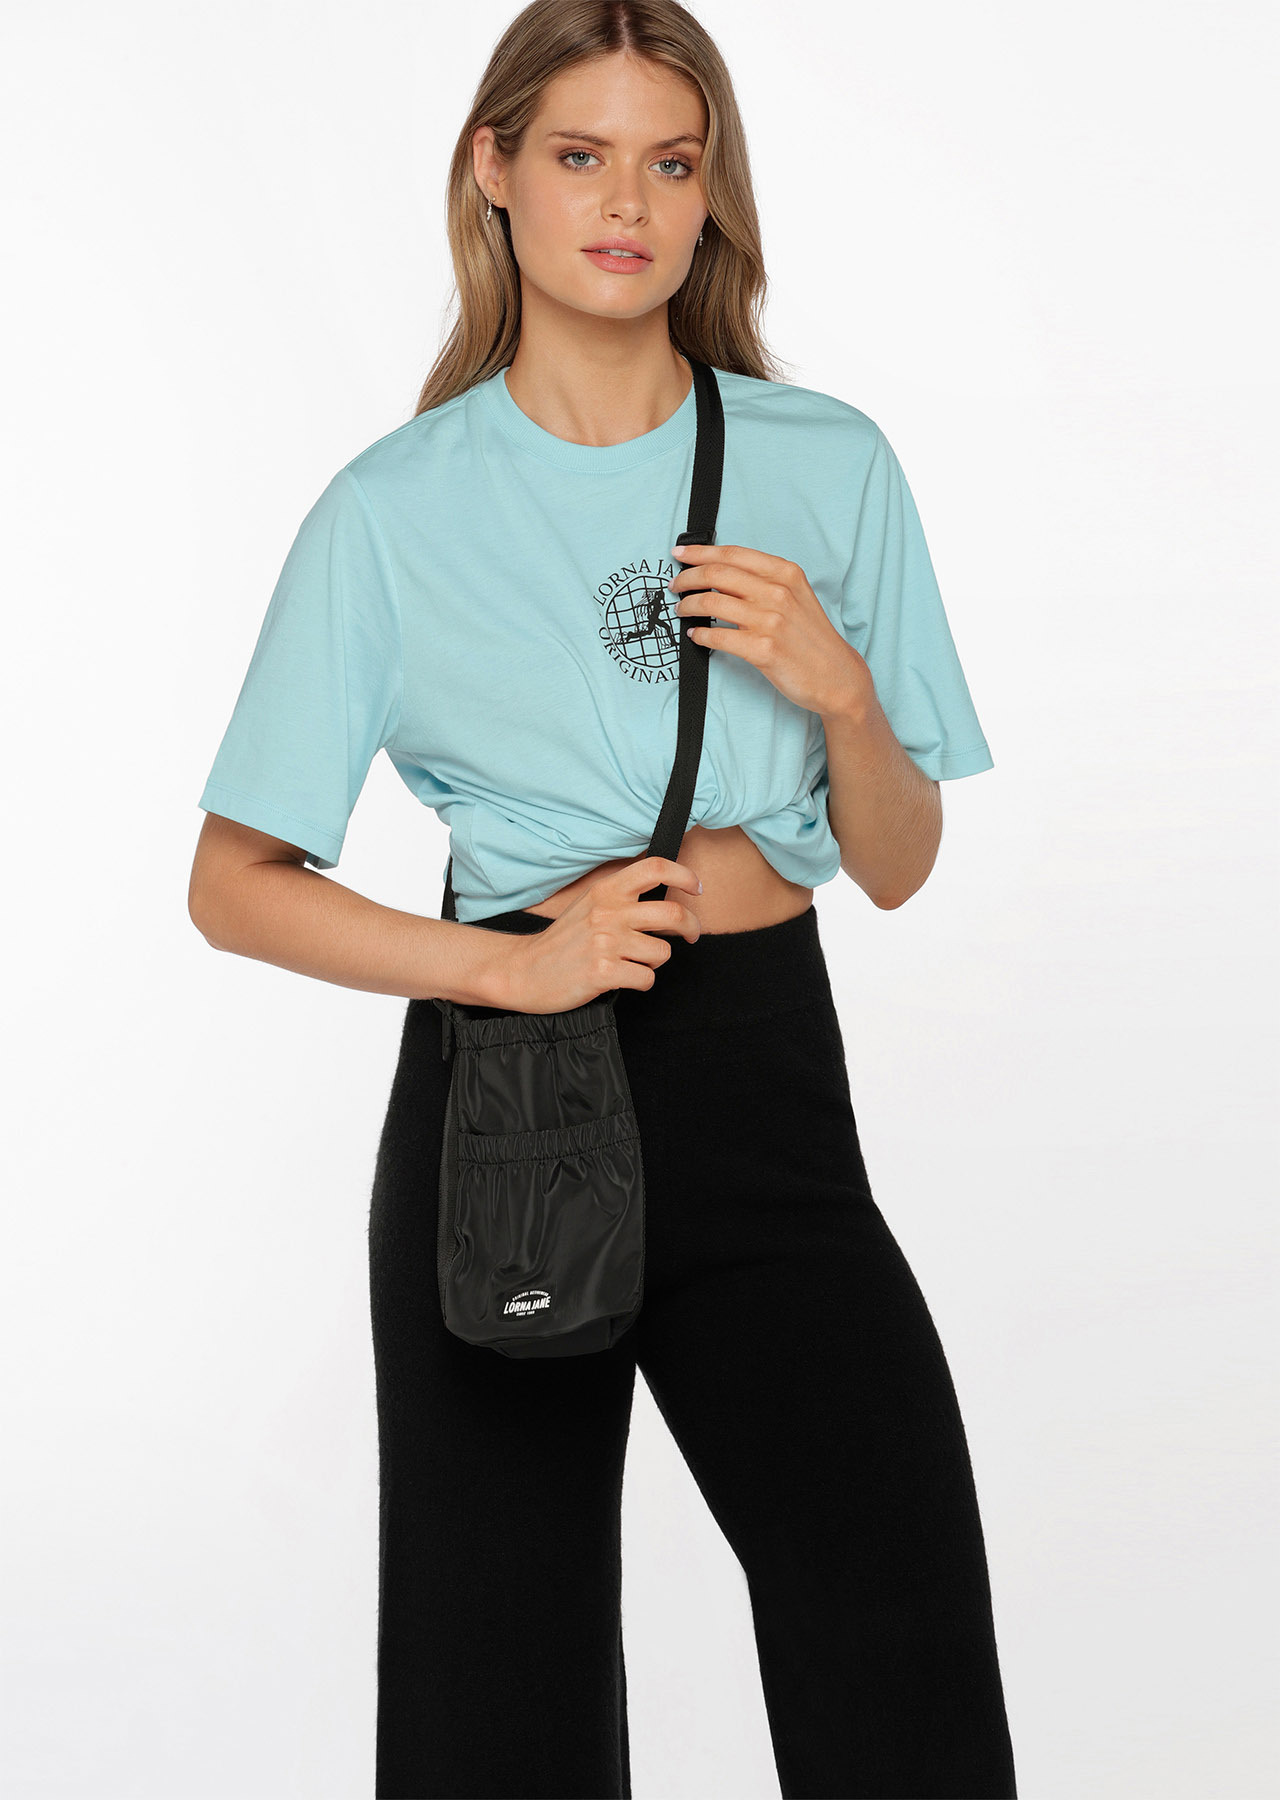 NEW lululemon Water Bottle Crossbody Bag Available in 5 Colors